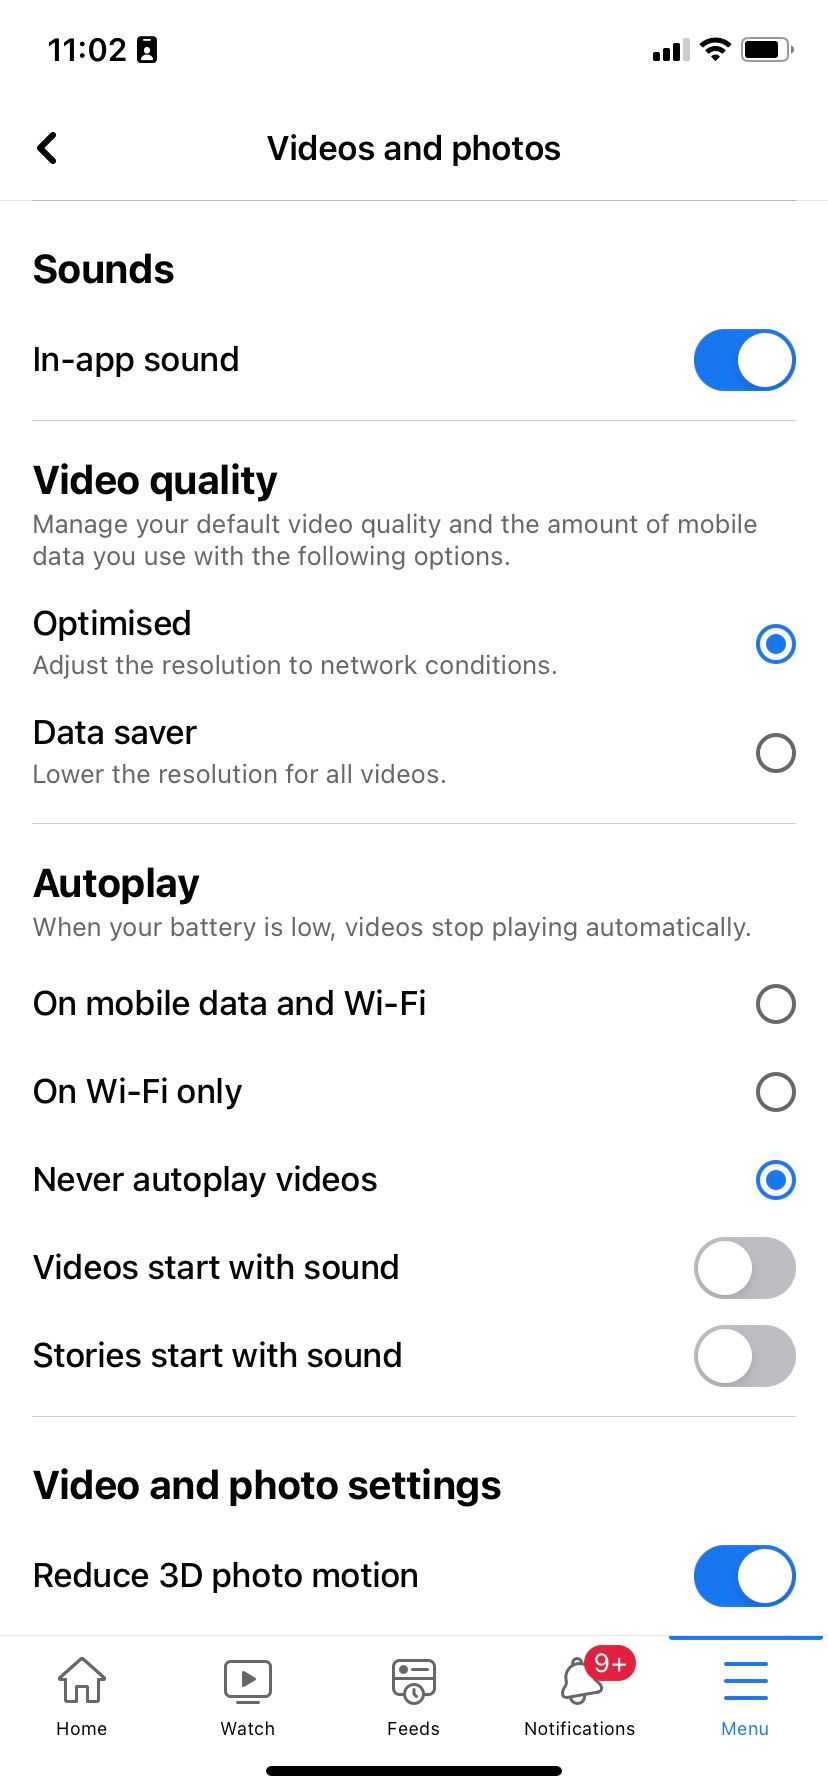 Video and photo settings in Facebook for iOS